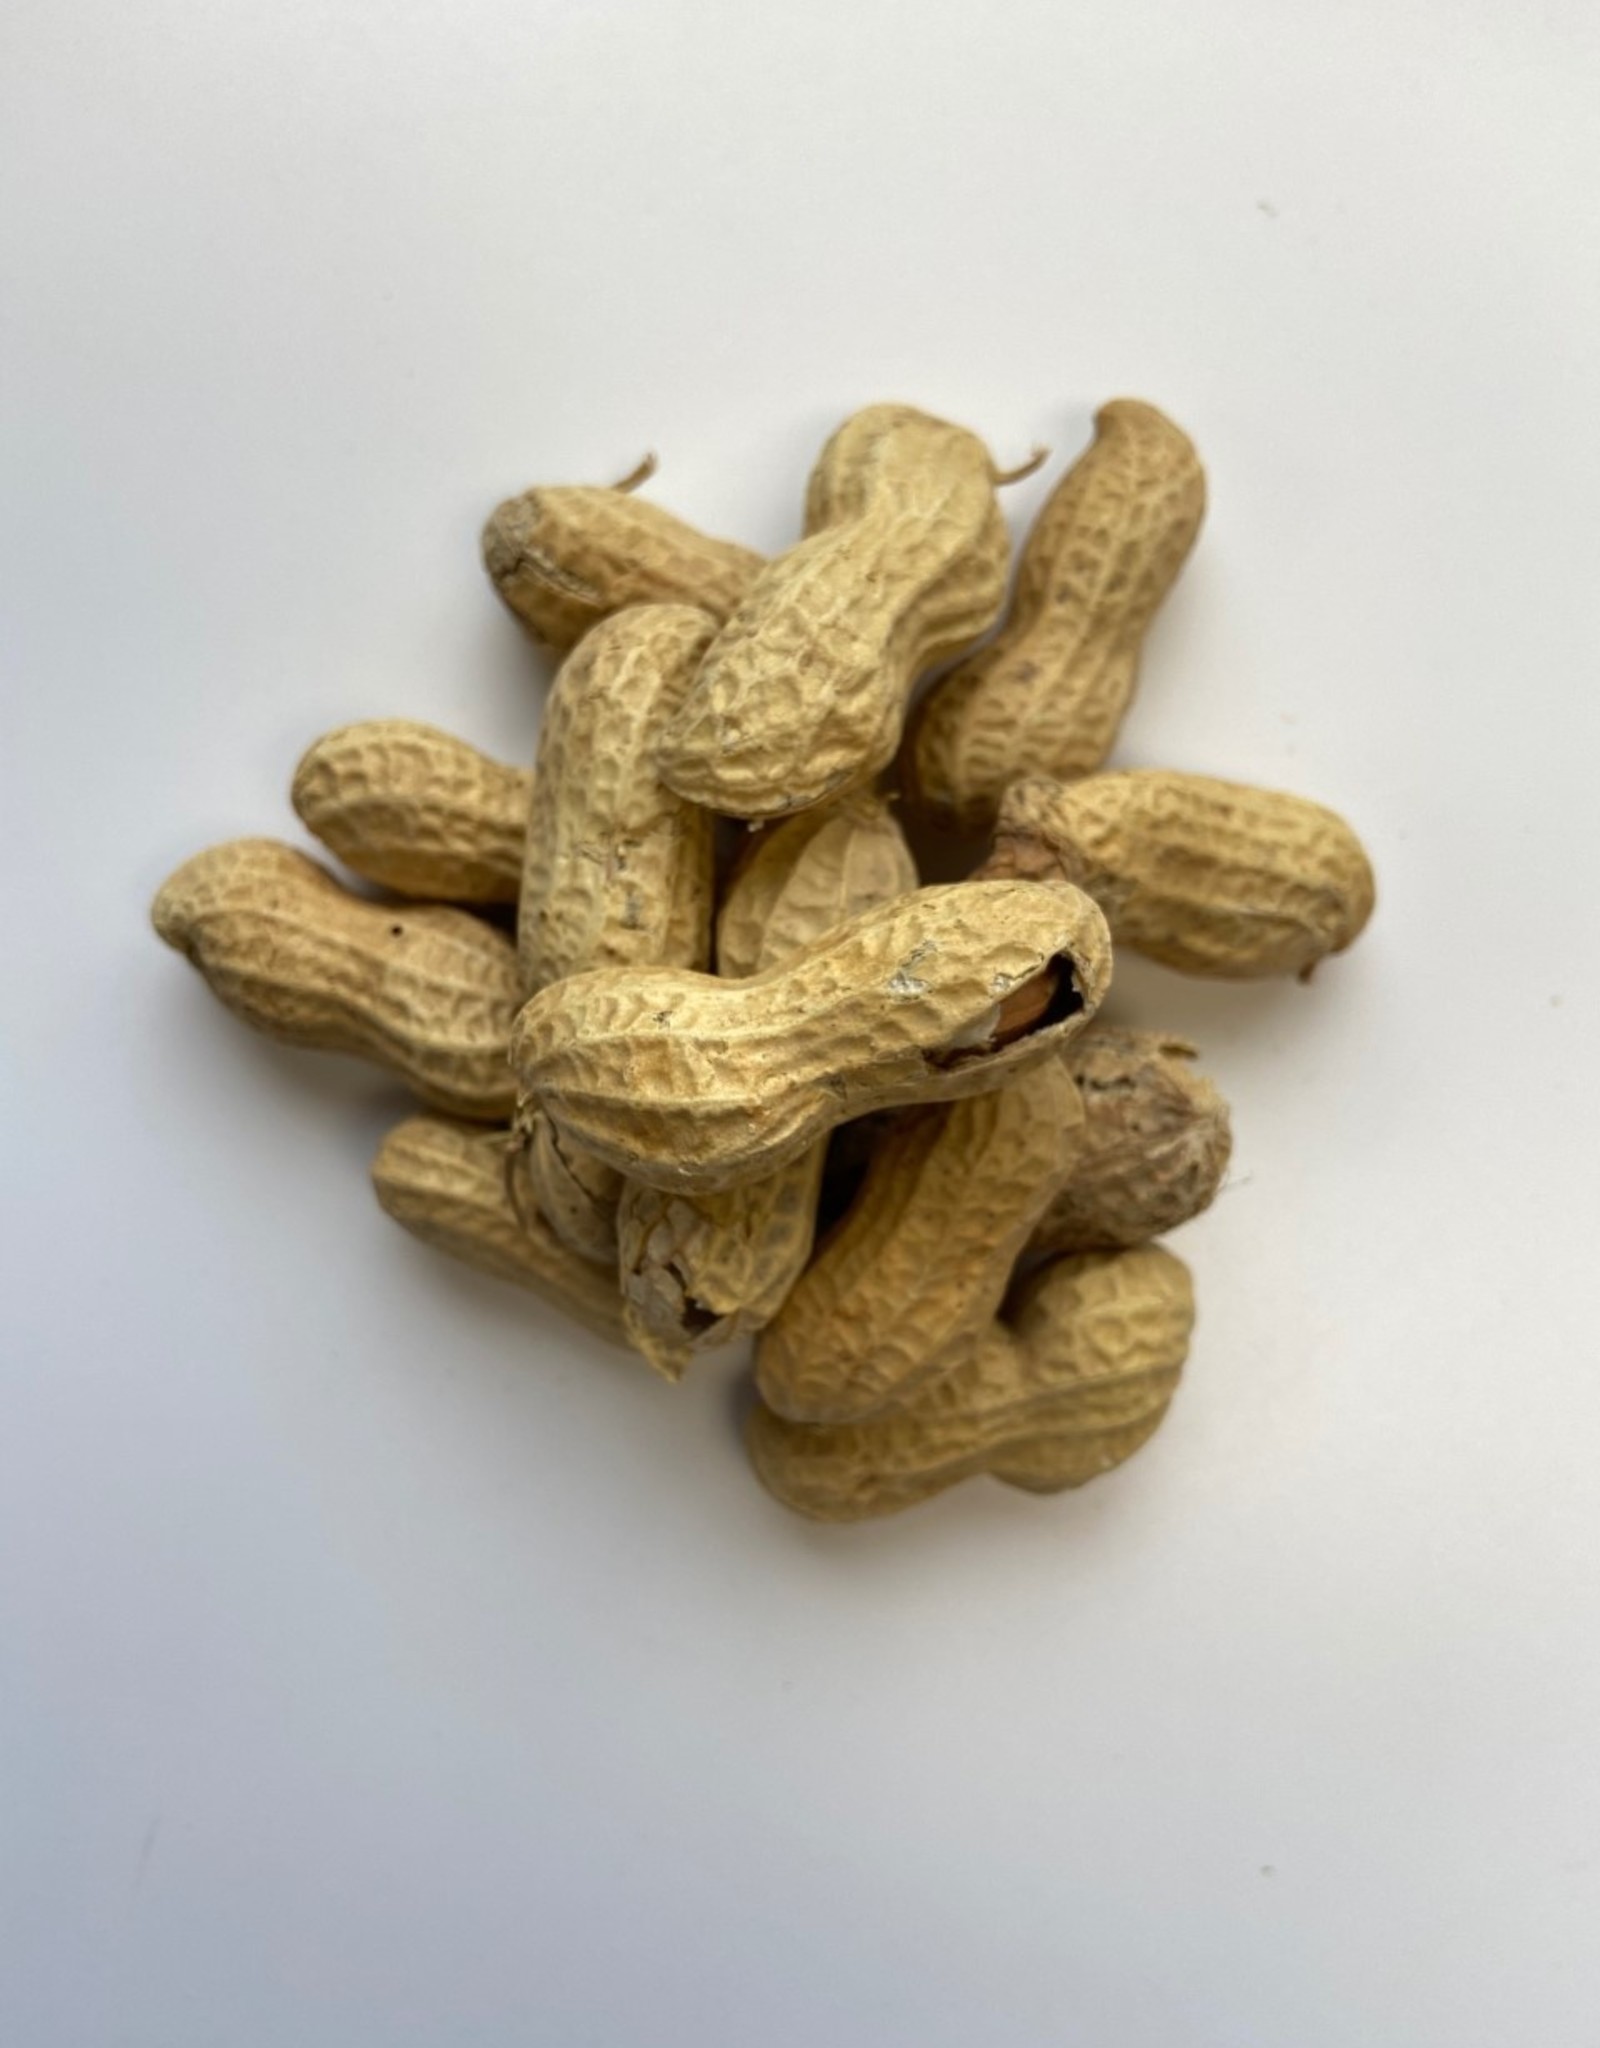 UNBRANDED PEANUTS RAW IN SHELL 5 LBS